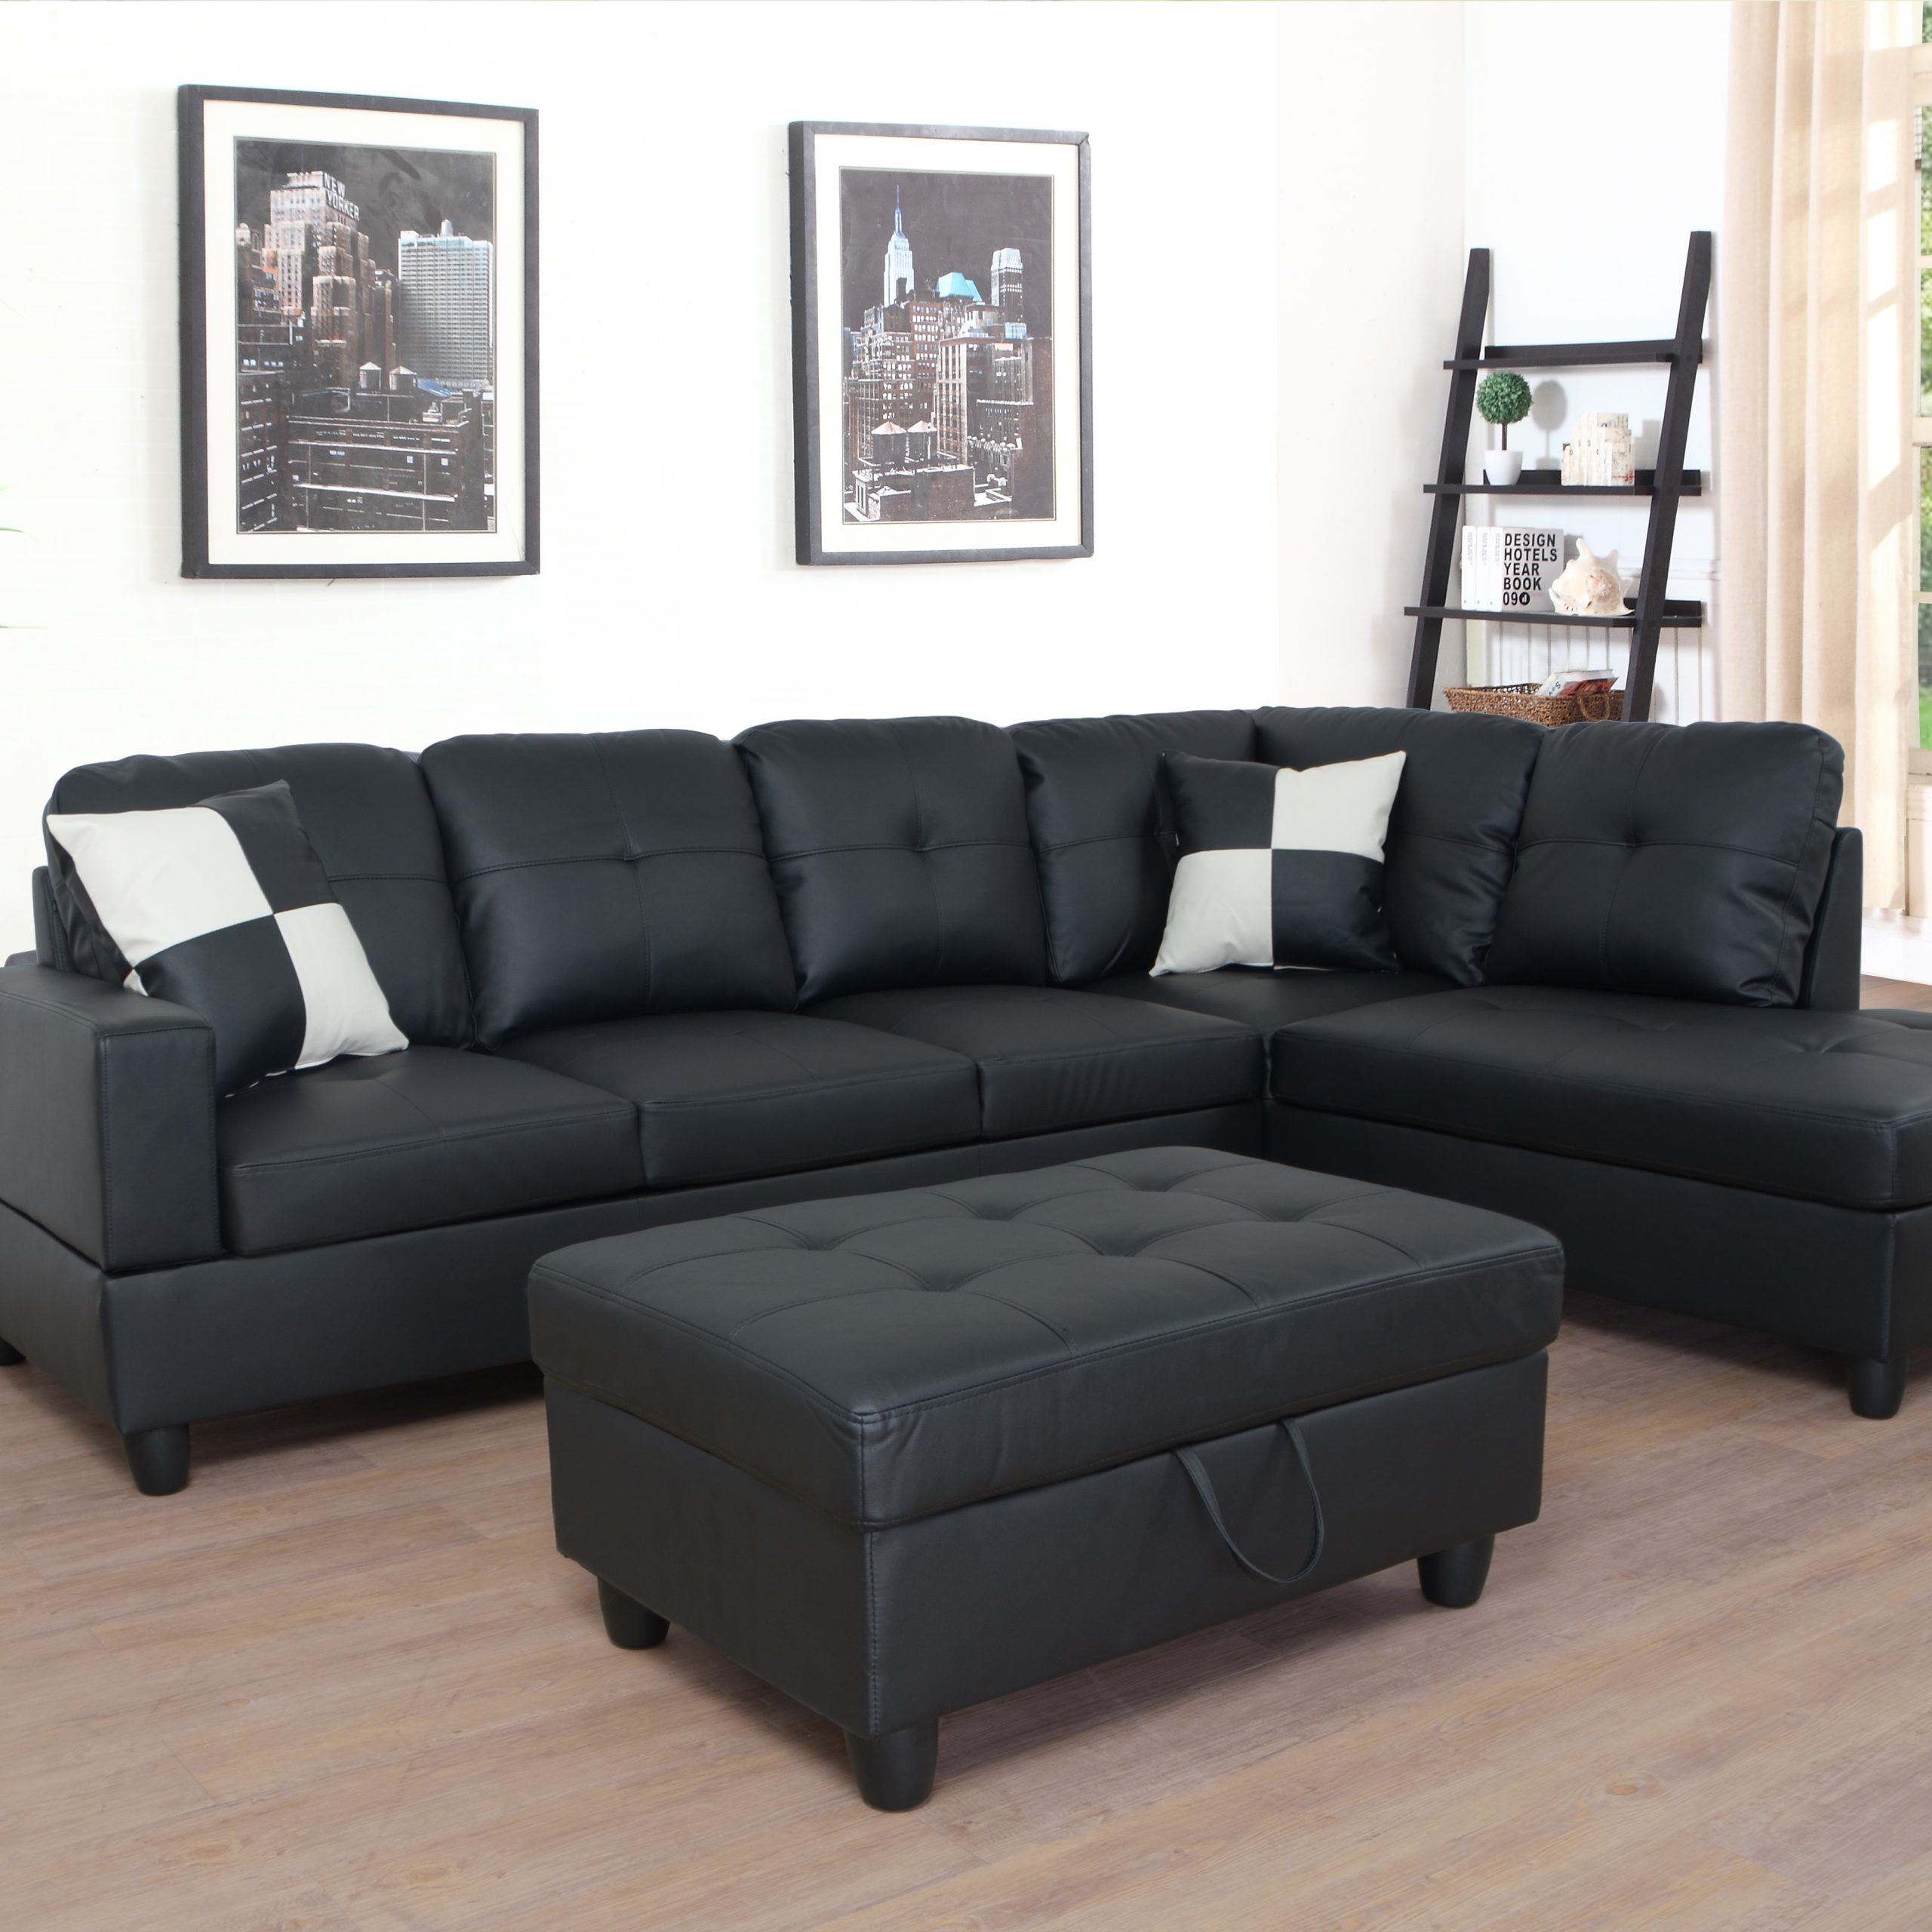 3 Pc Sectional Sofa Set, (black) Faux Leather Right  Facing Sofa With Free  Storage Ottoman Pertaining To Right Facing Black Sofas (Photo 10 of 15)